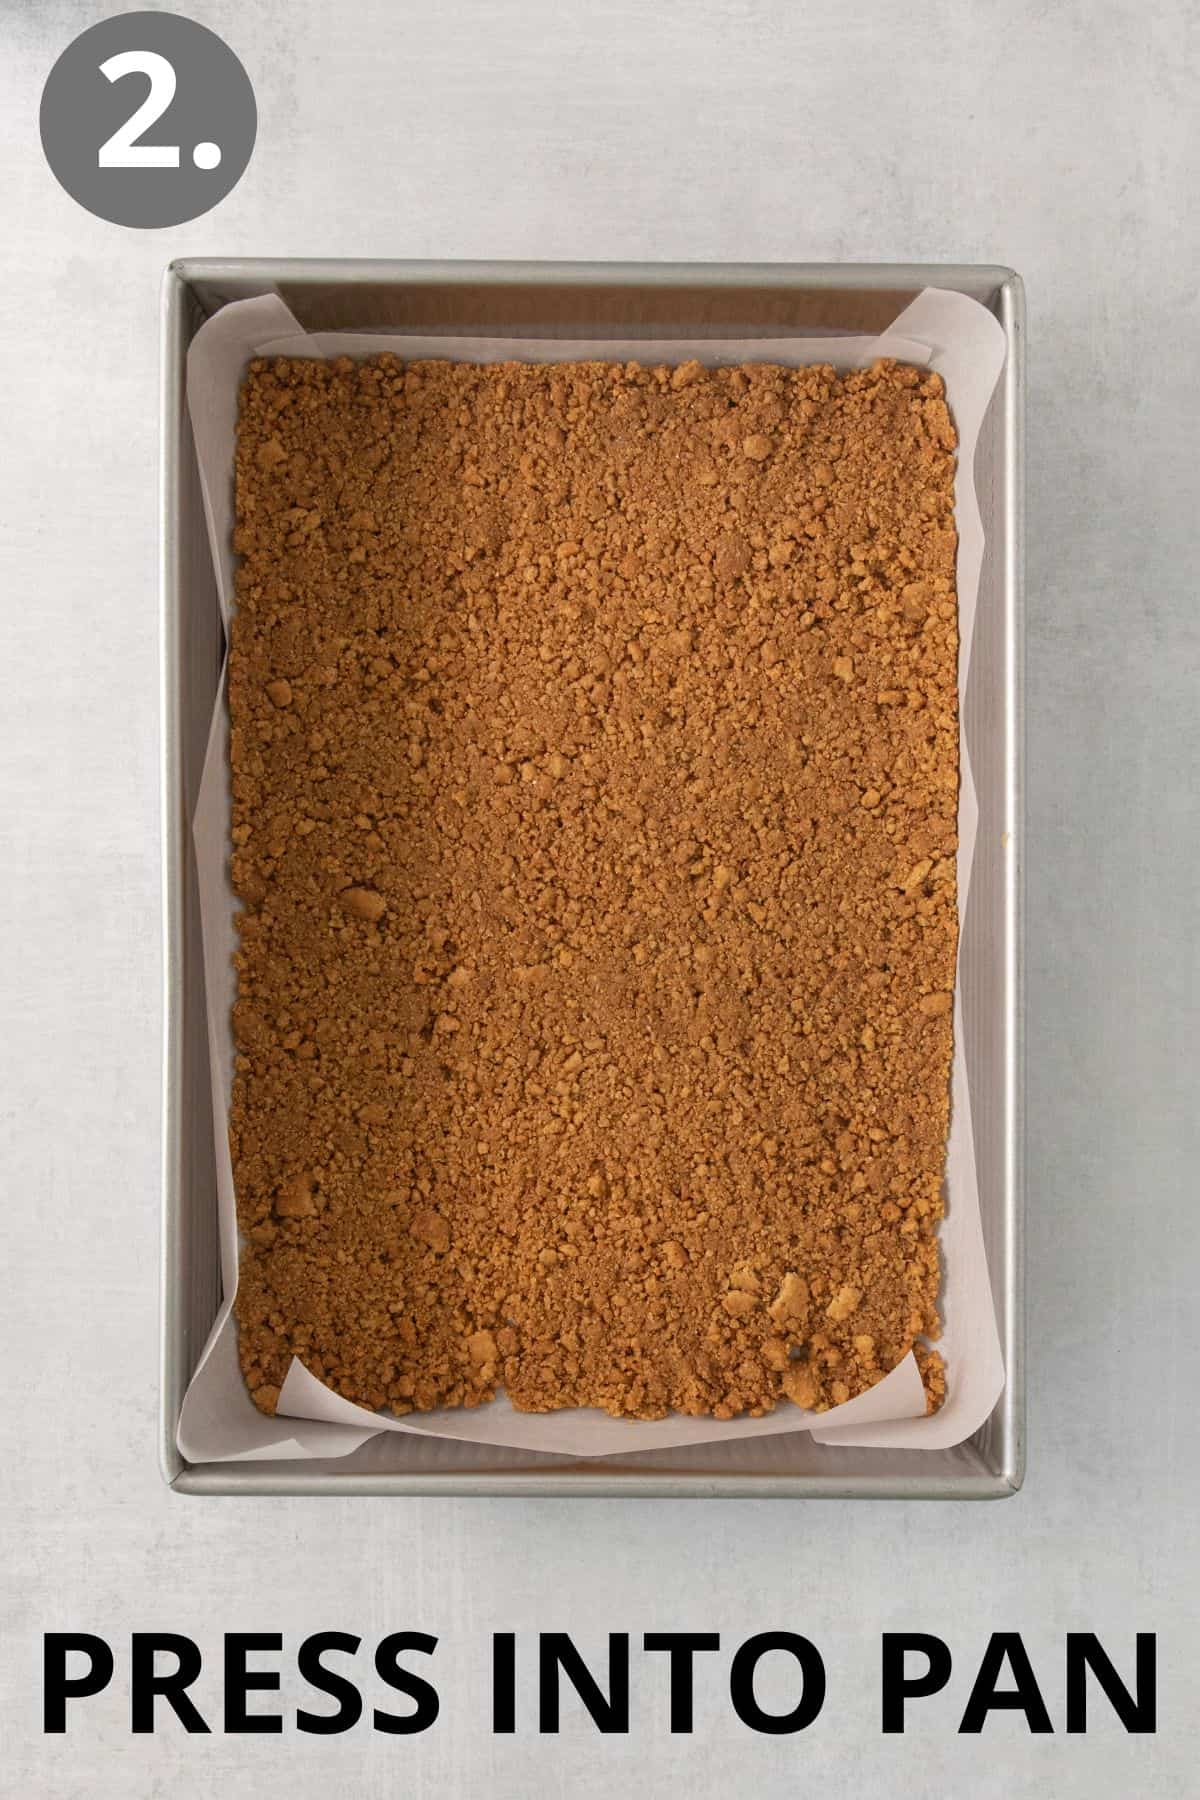 Graham cracker crumbs and butter pressed into a pan